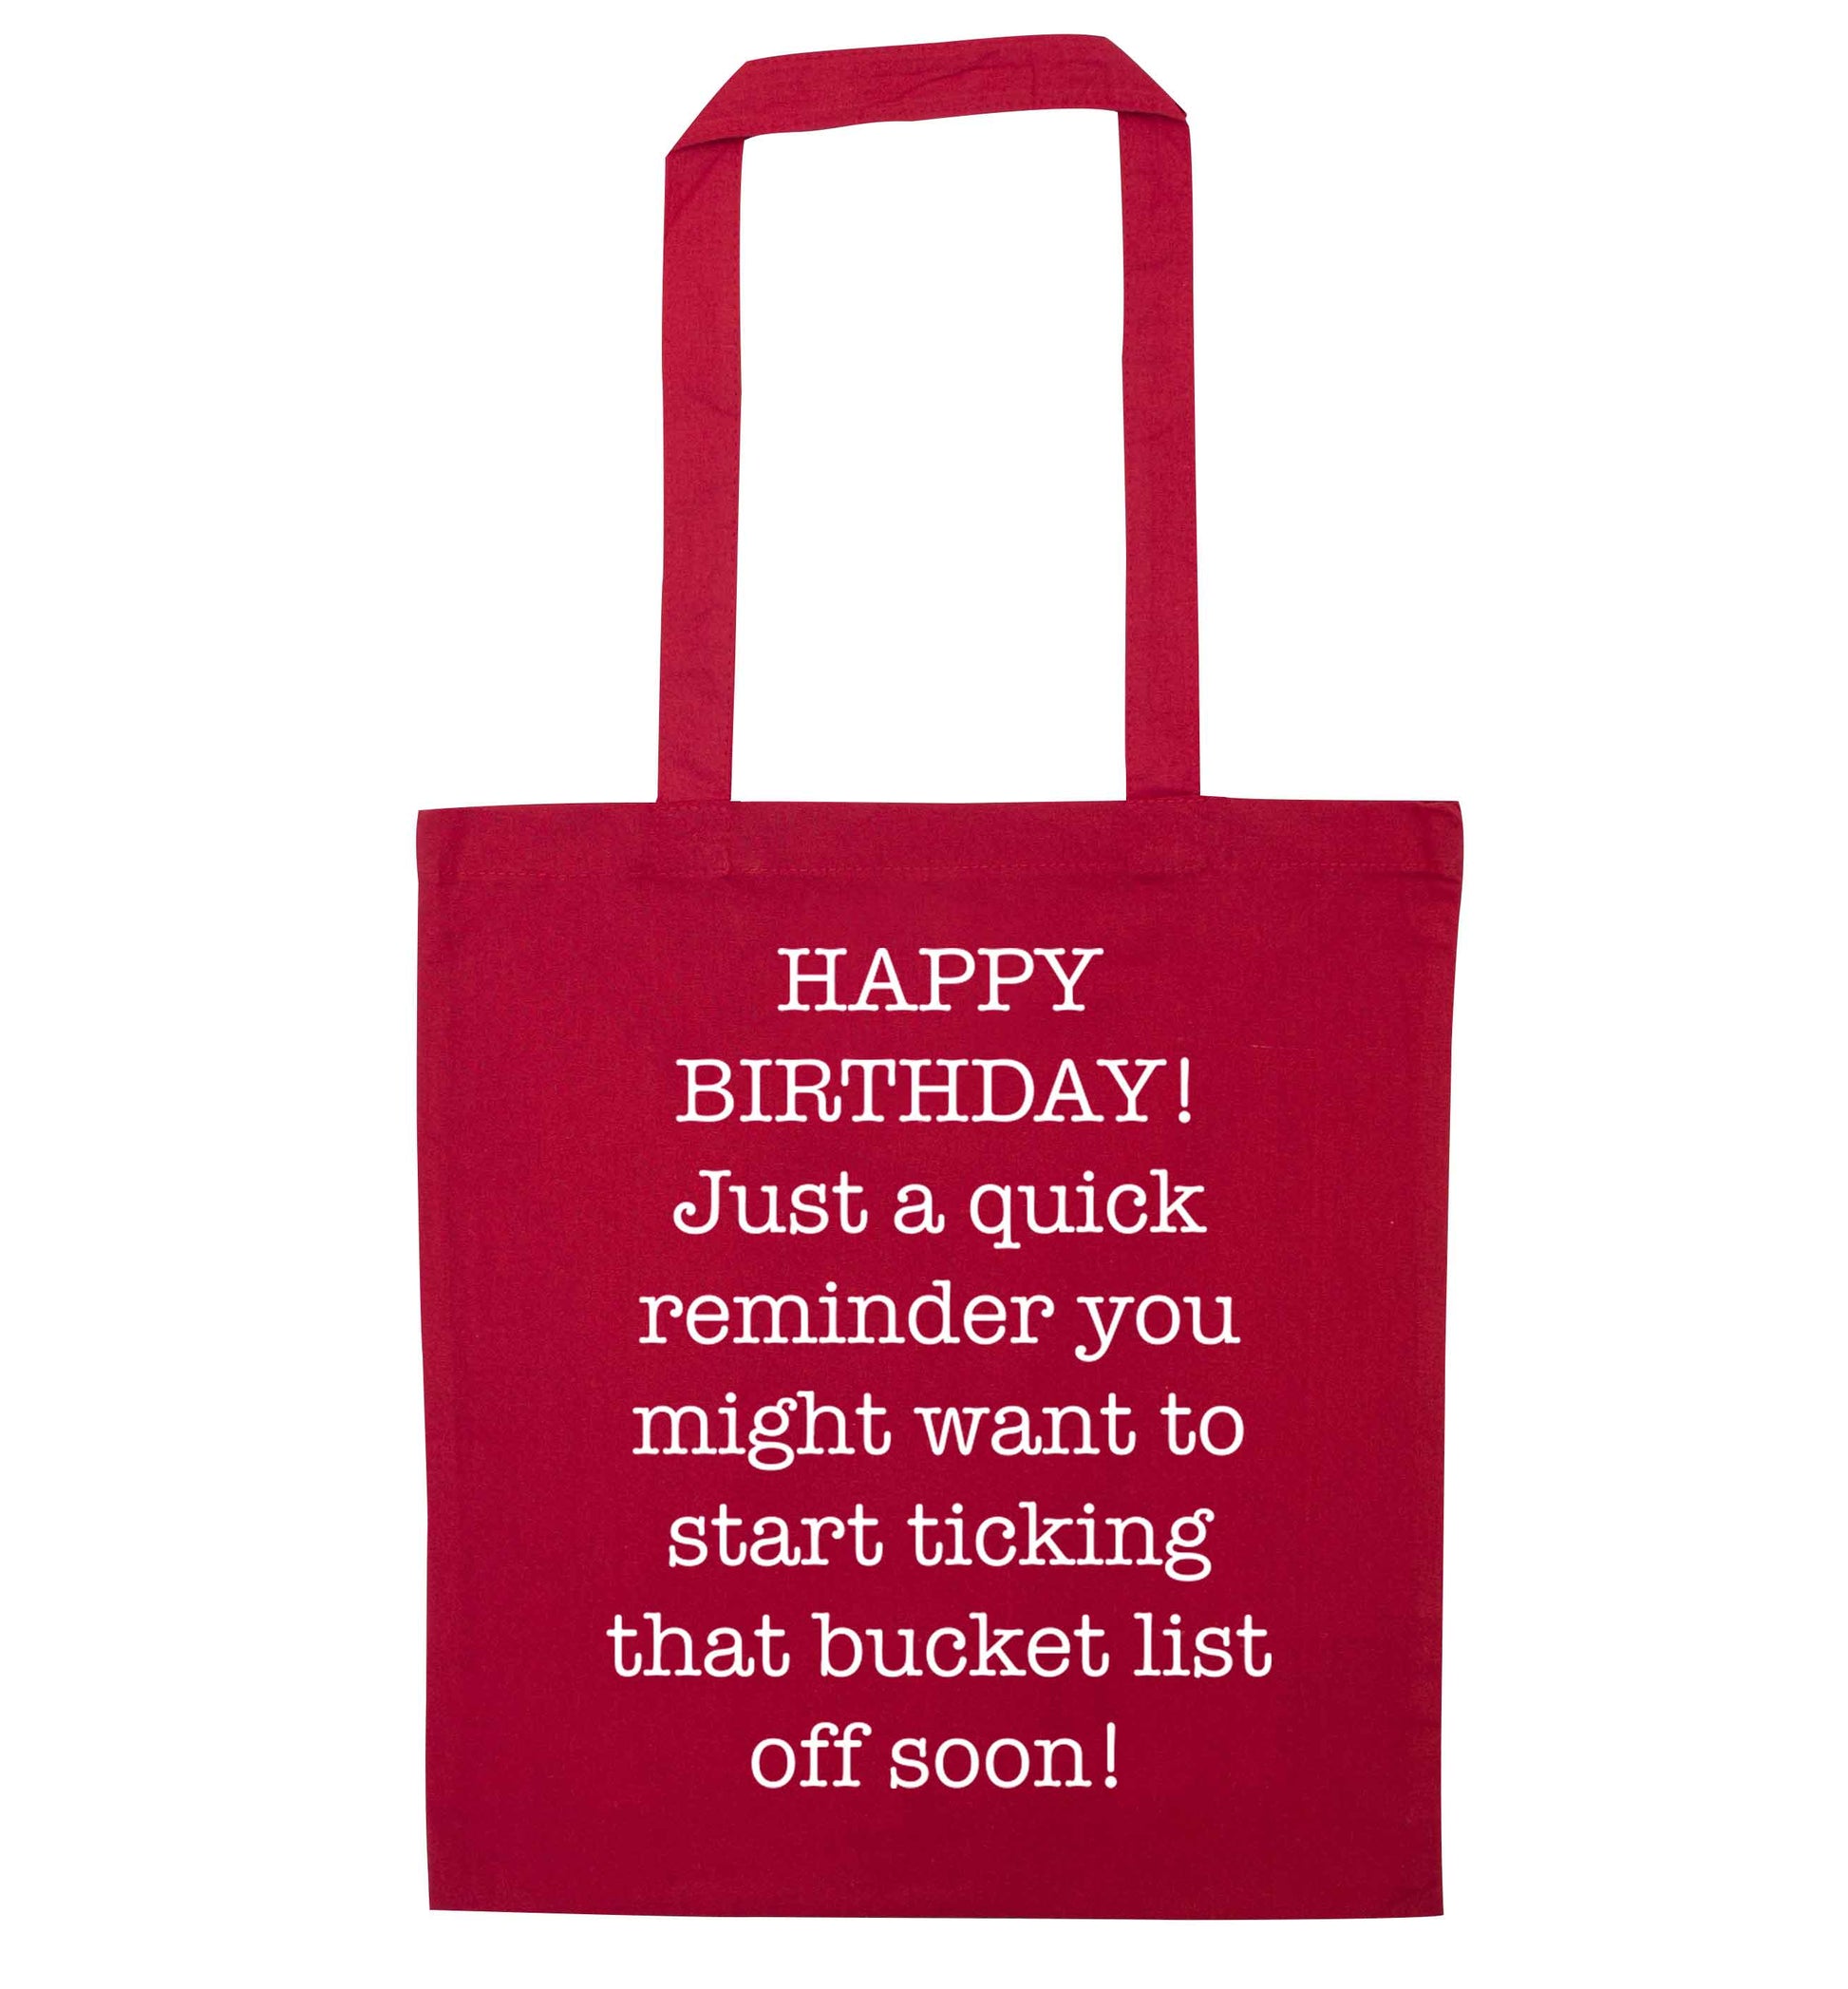 Happy birthday, just a quick reminder you might want to start ticking that bucket list off soon red tote bag